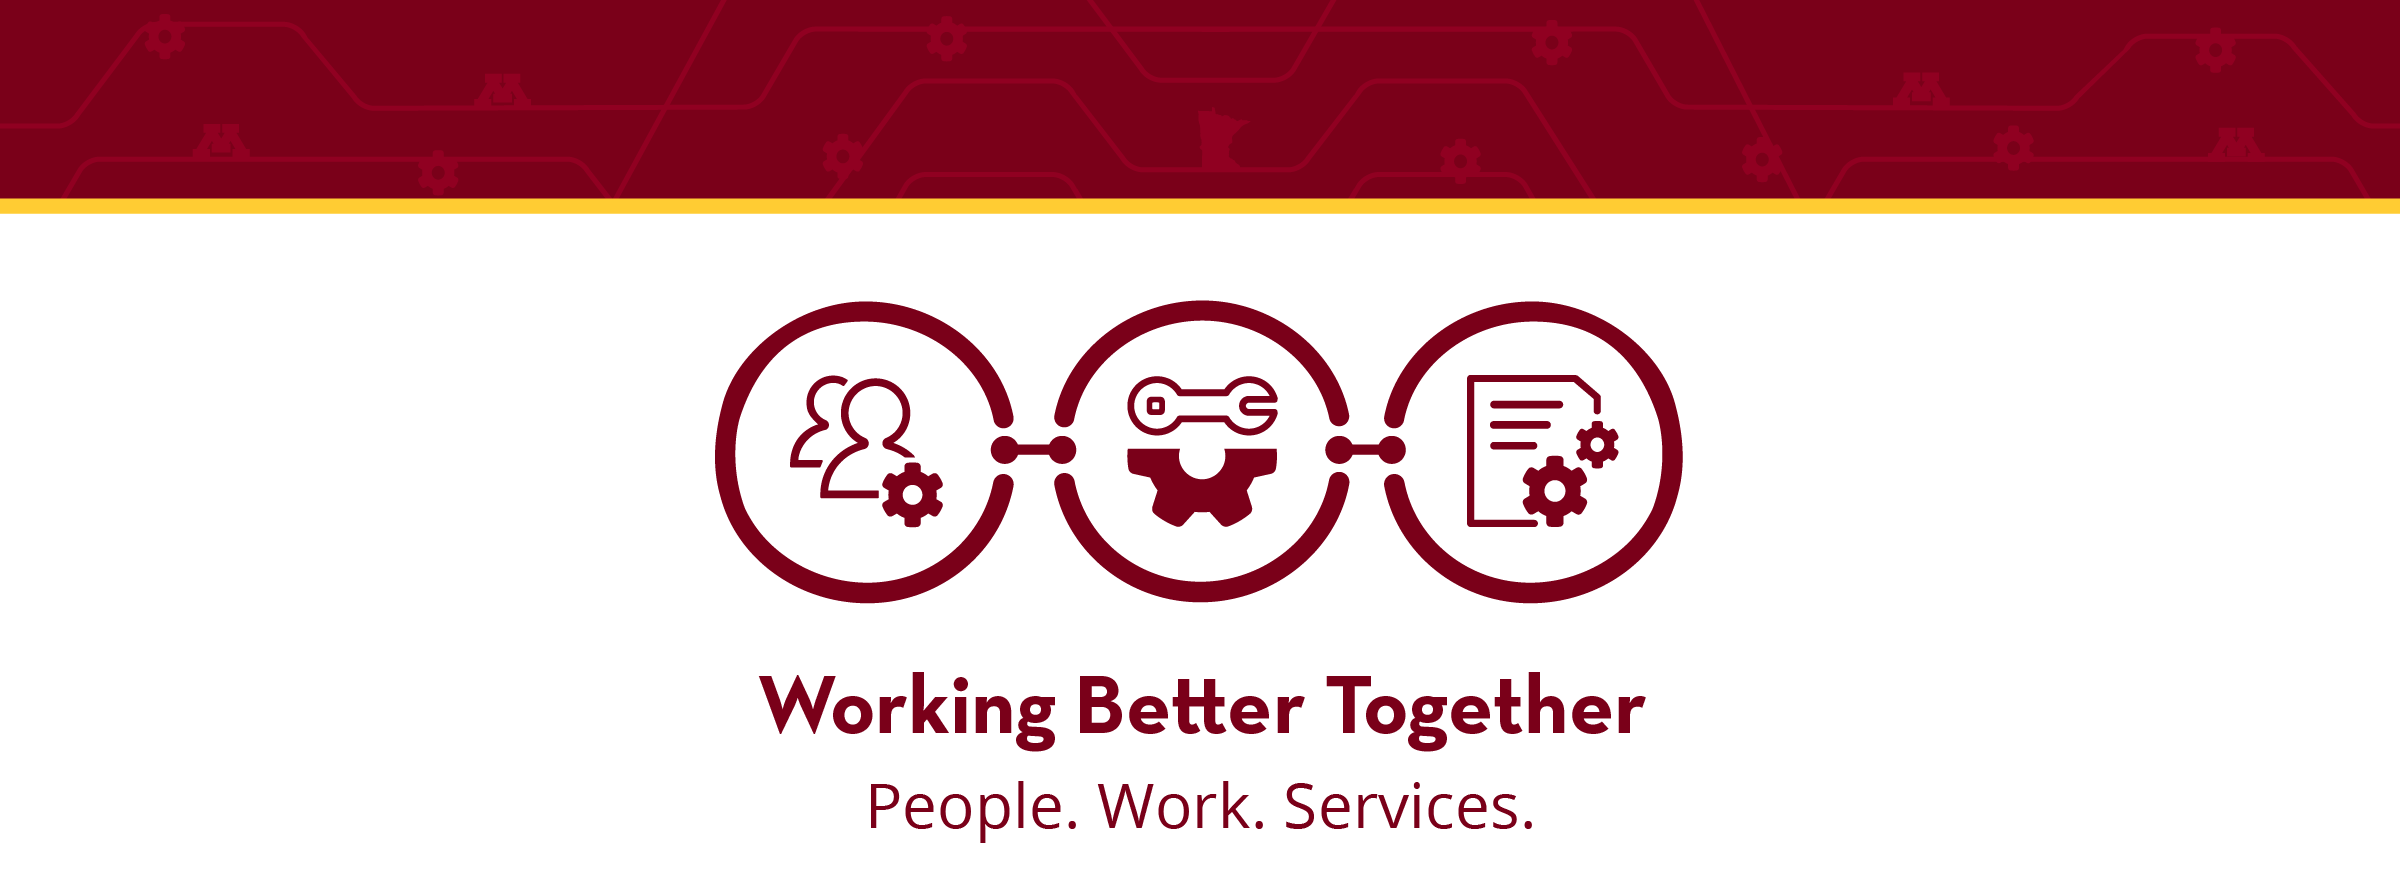 Decorative Graphic with interlocking Icons for People, Work & Services with tagline: Working Better Together. People. Work. Services.